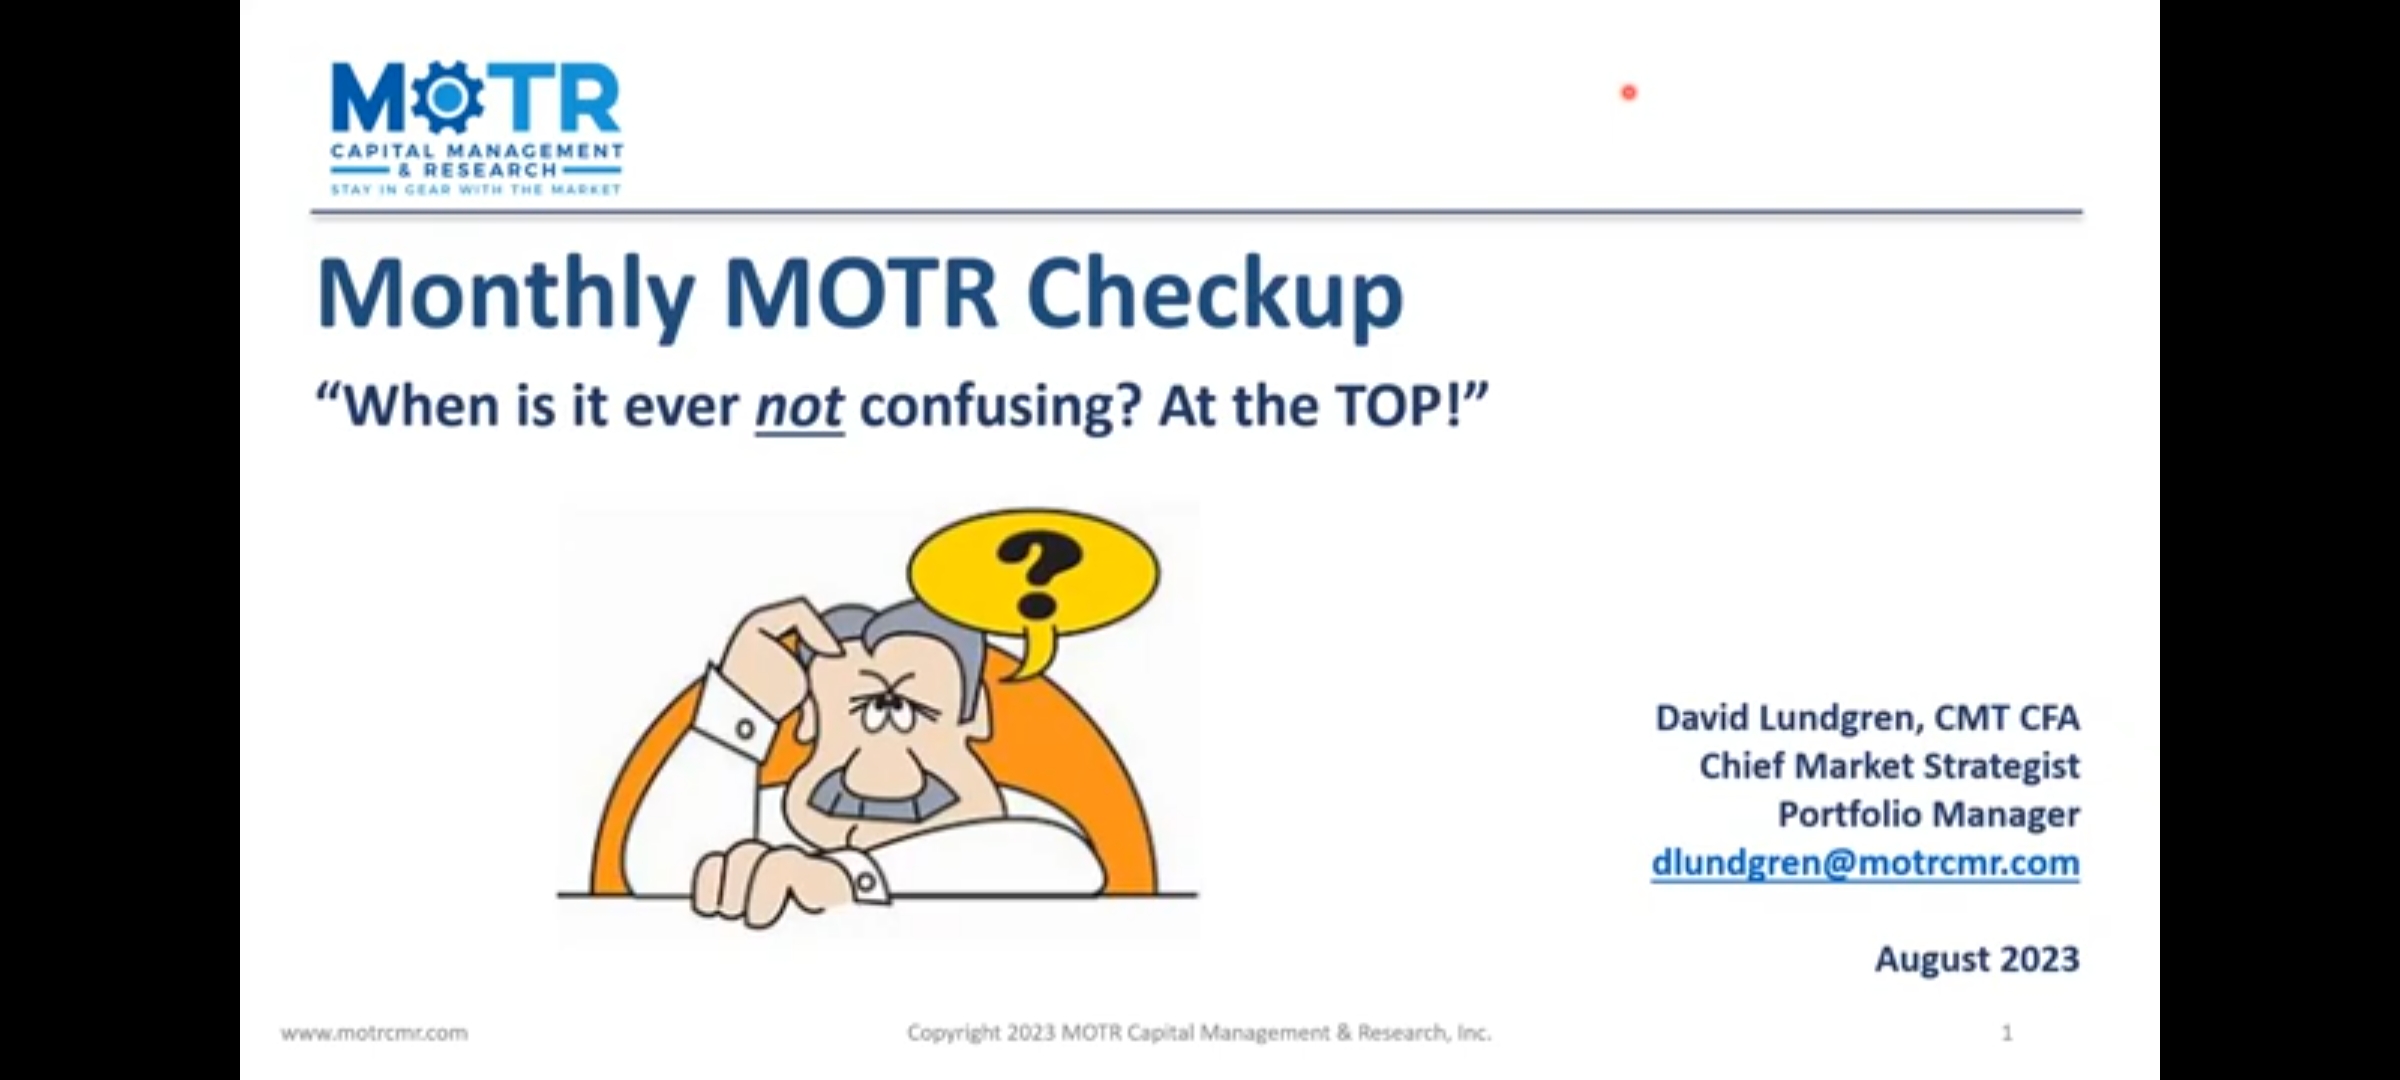 Monthly MOTR Checkup Video: “When is it ever not confusing? At the TOP!”